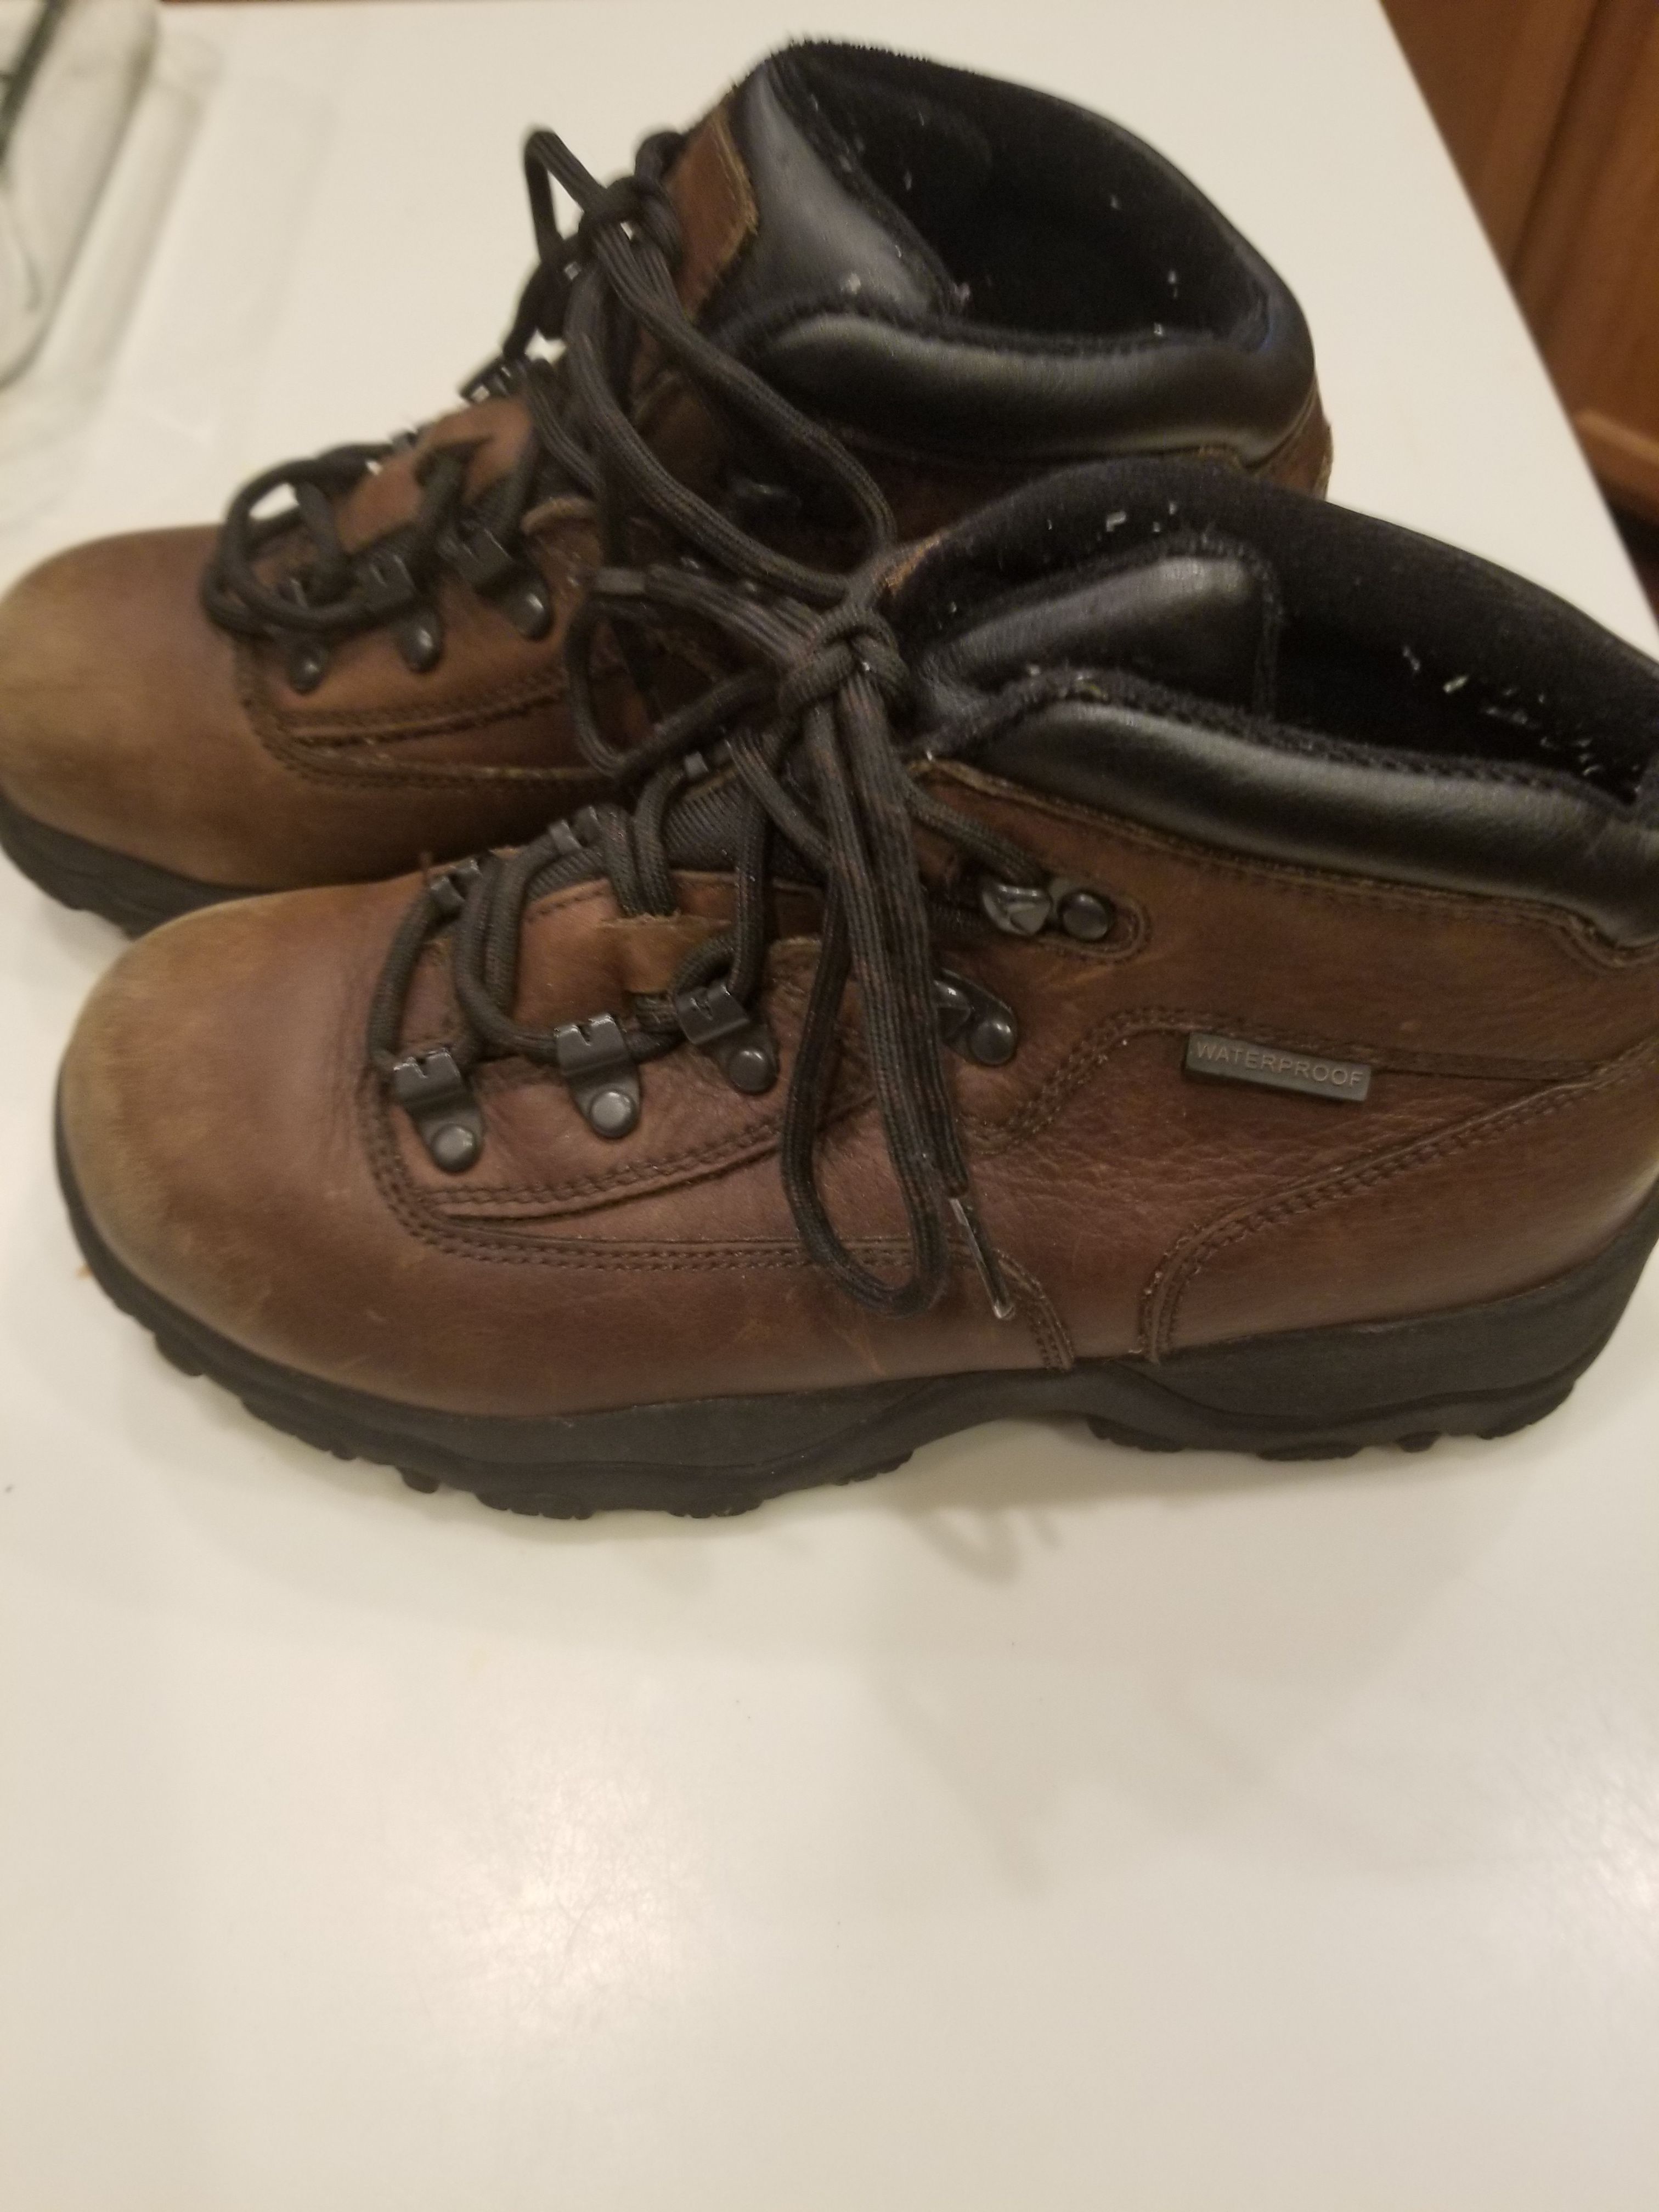 Boys Size 4 1/2 leather boots